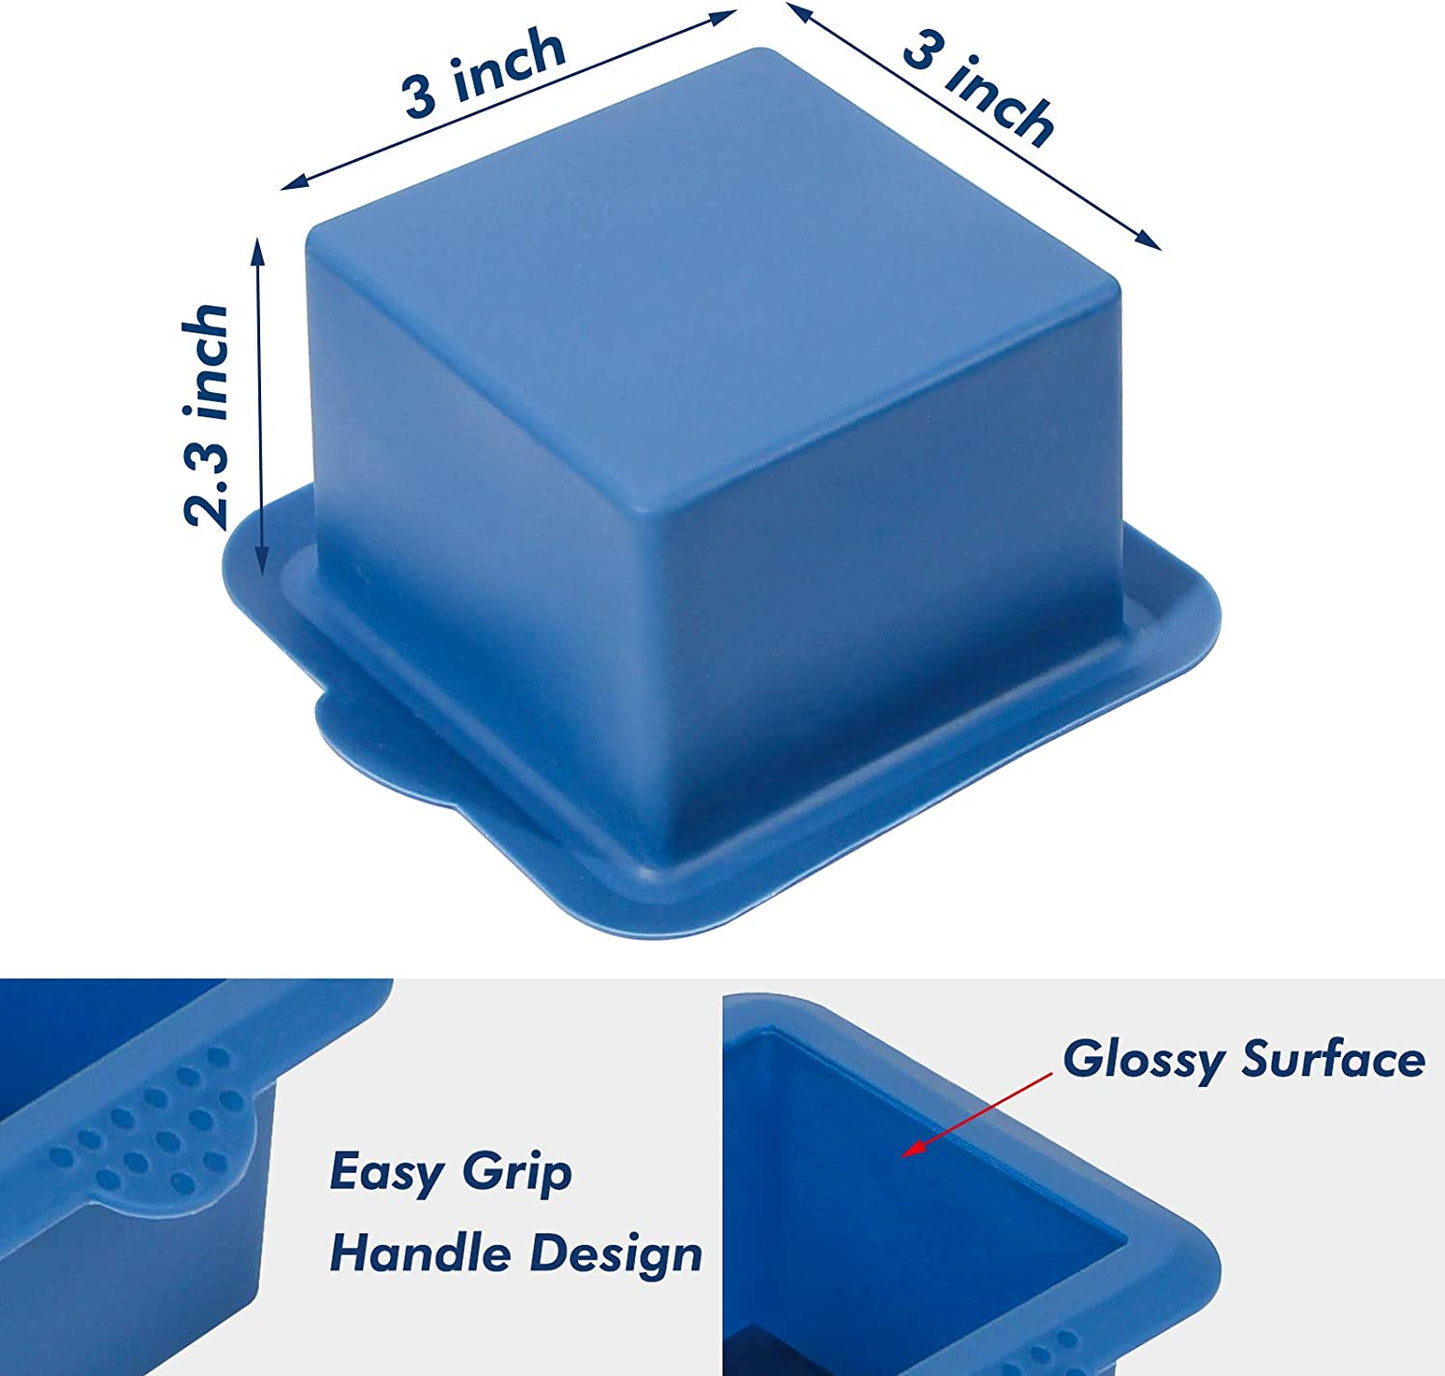 Webake Silicone Square Mini Cake Mold 3x3 Inch for Individual Portion Baking Molds (Pack of 4)